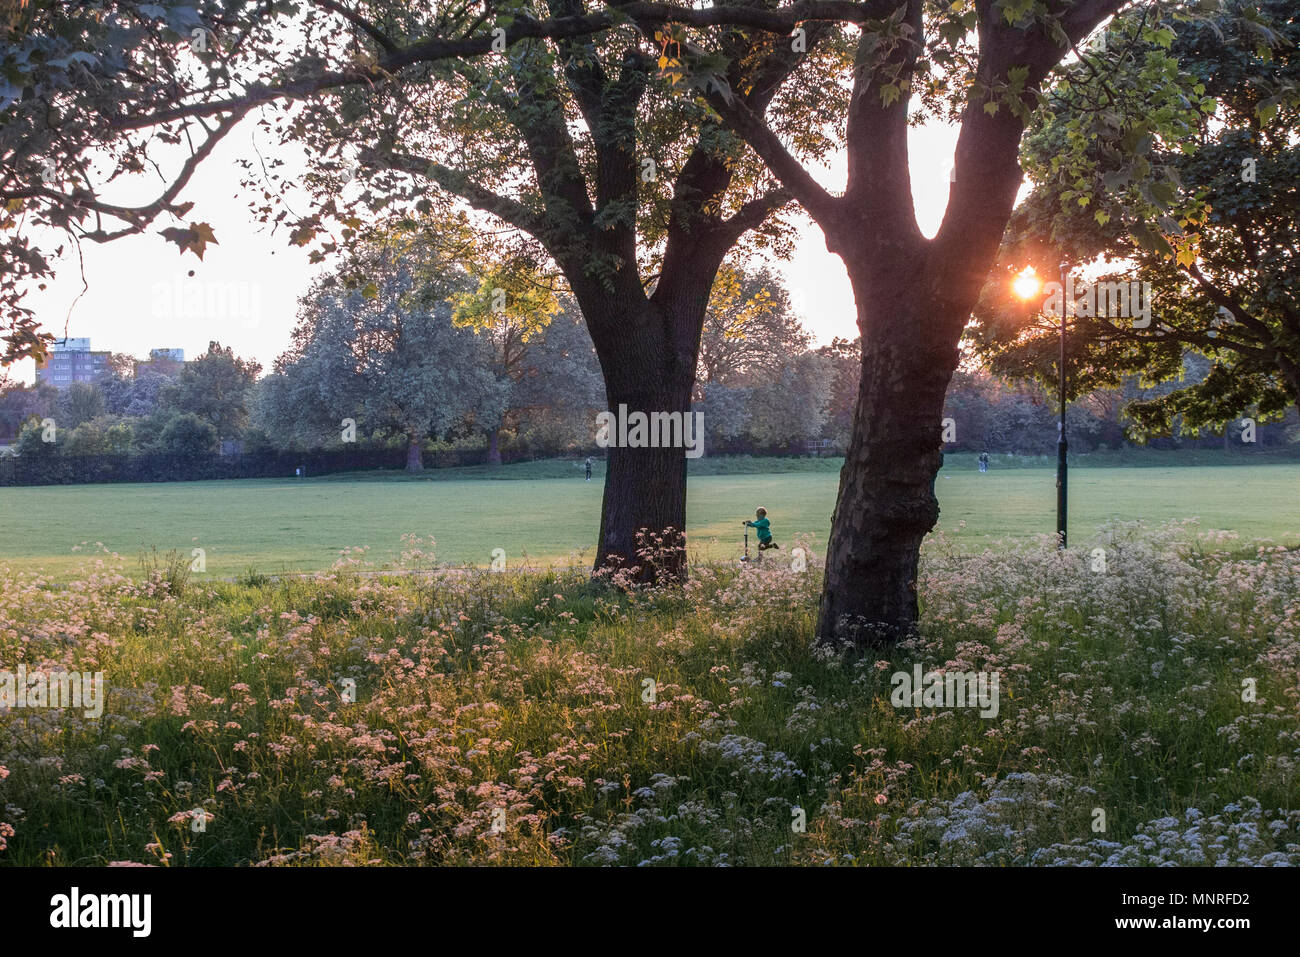 A young child scooters in a London park Stock Photo